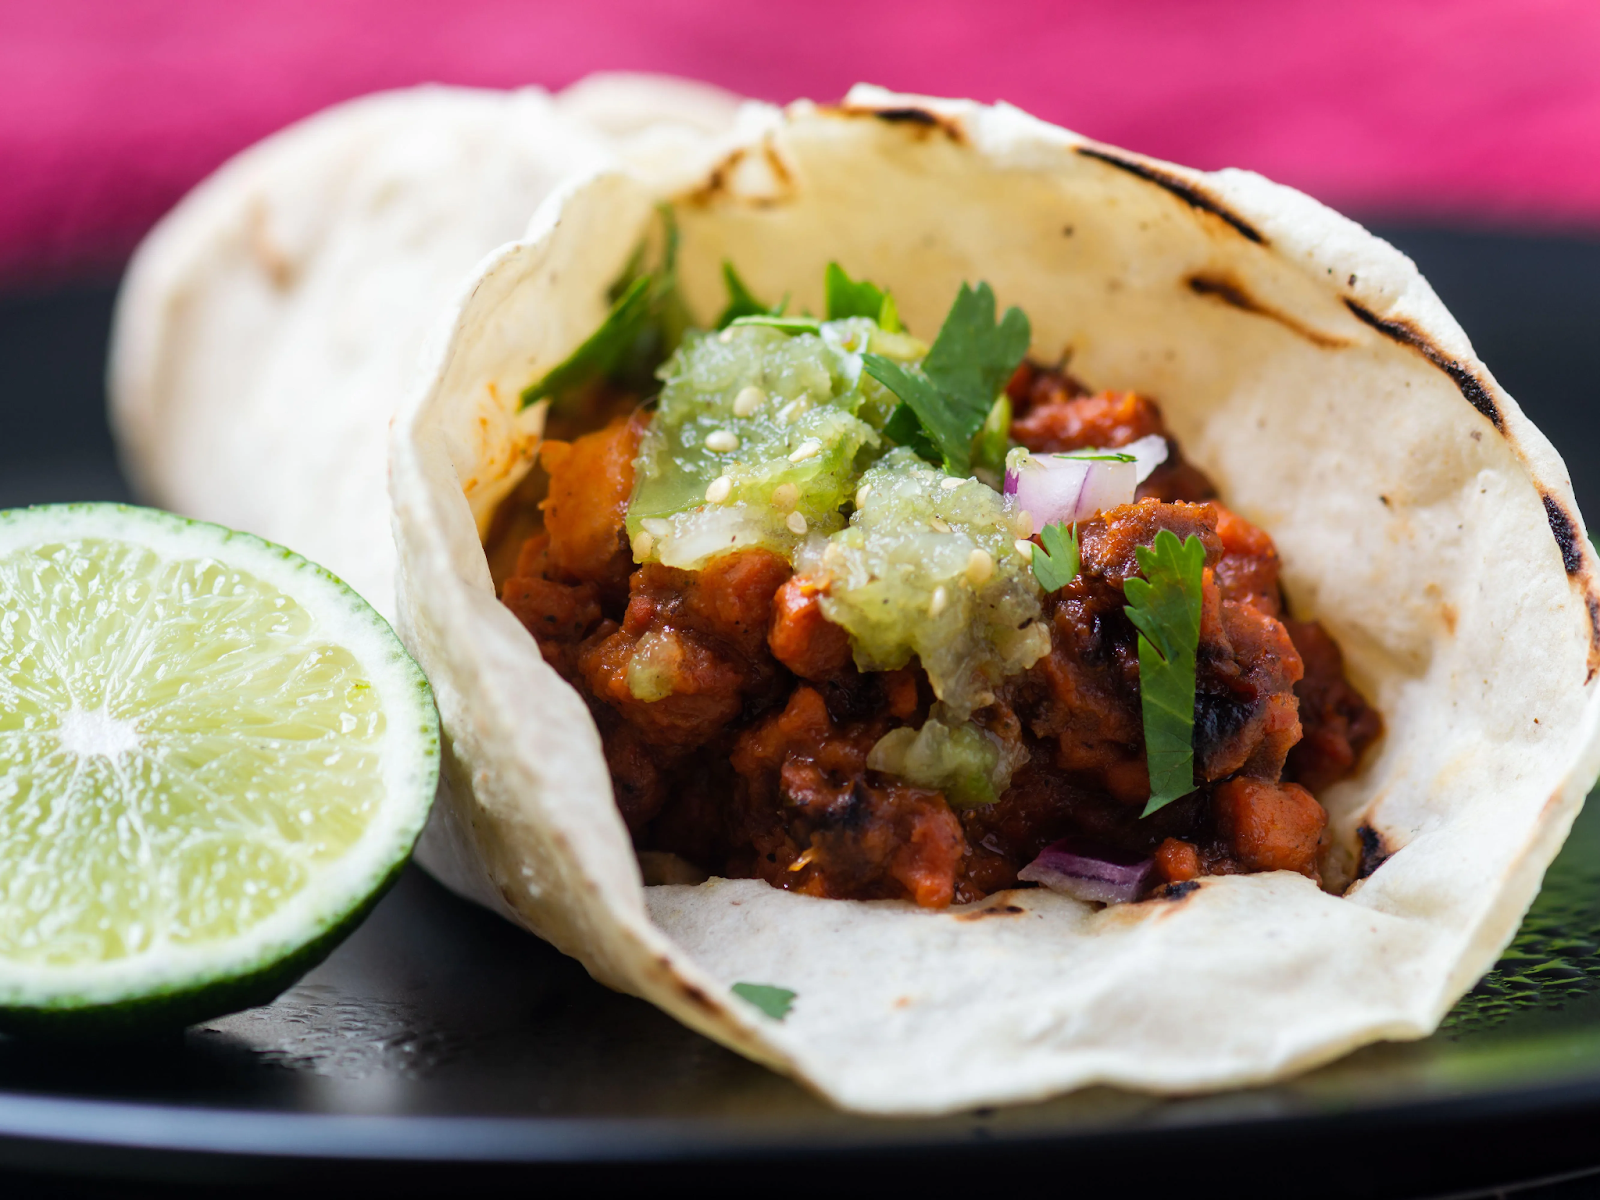 Vegan Al Pastor: A Sustainable And Ethical Alternative To Meat-Based Options - Your Notable Guide